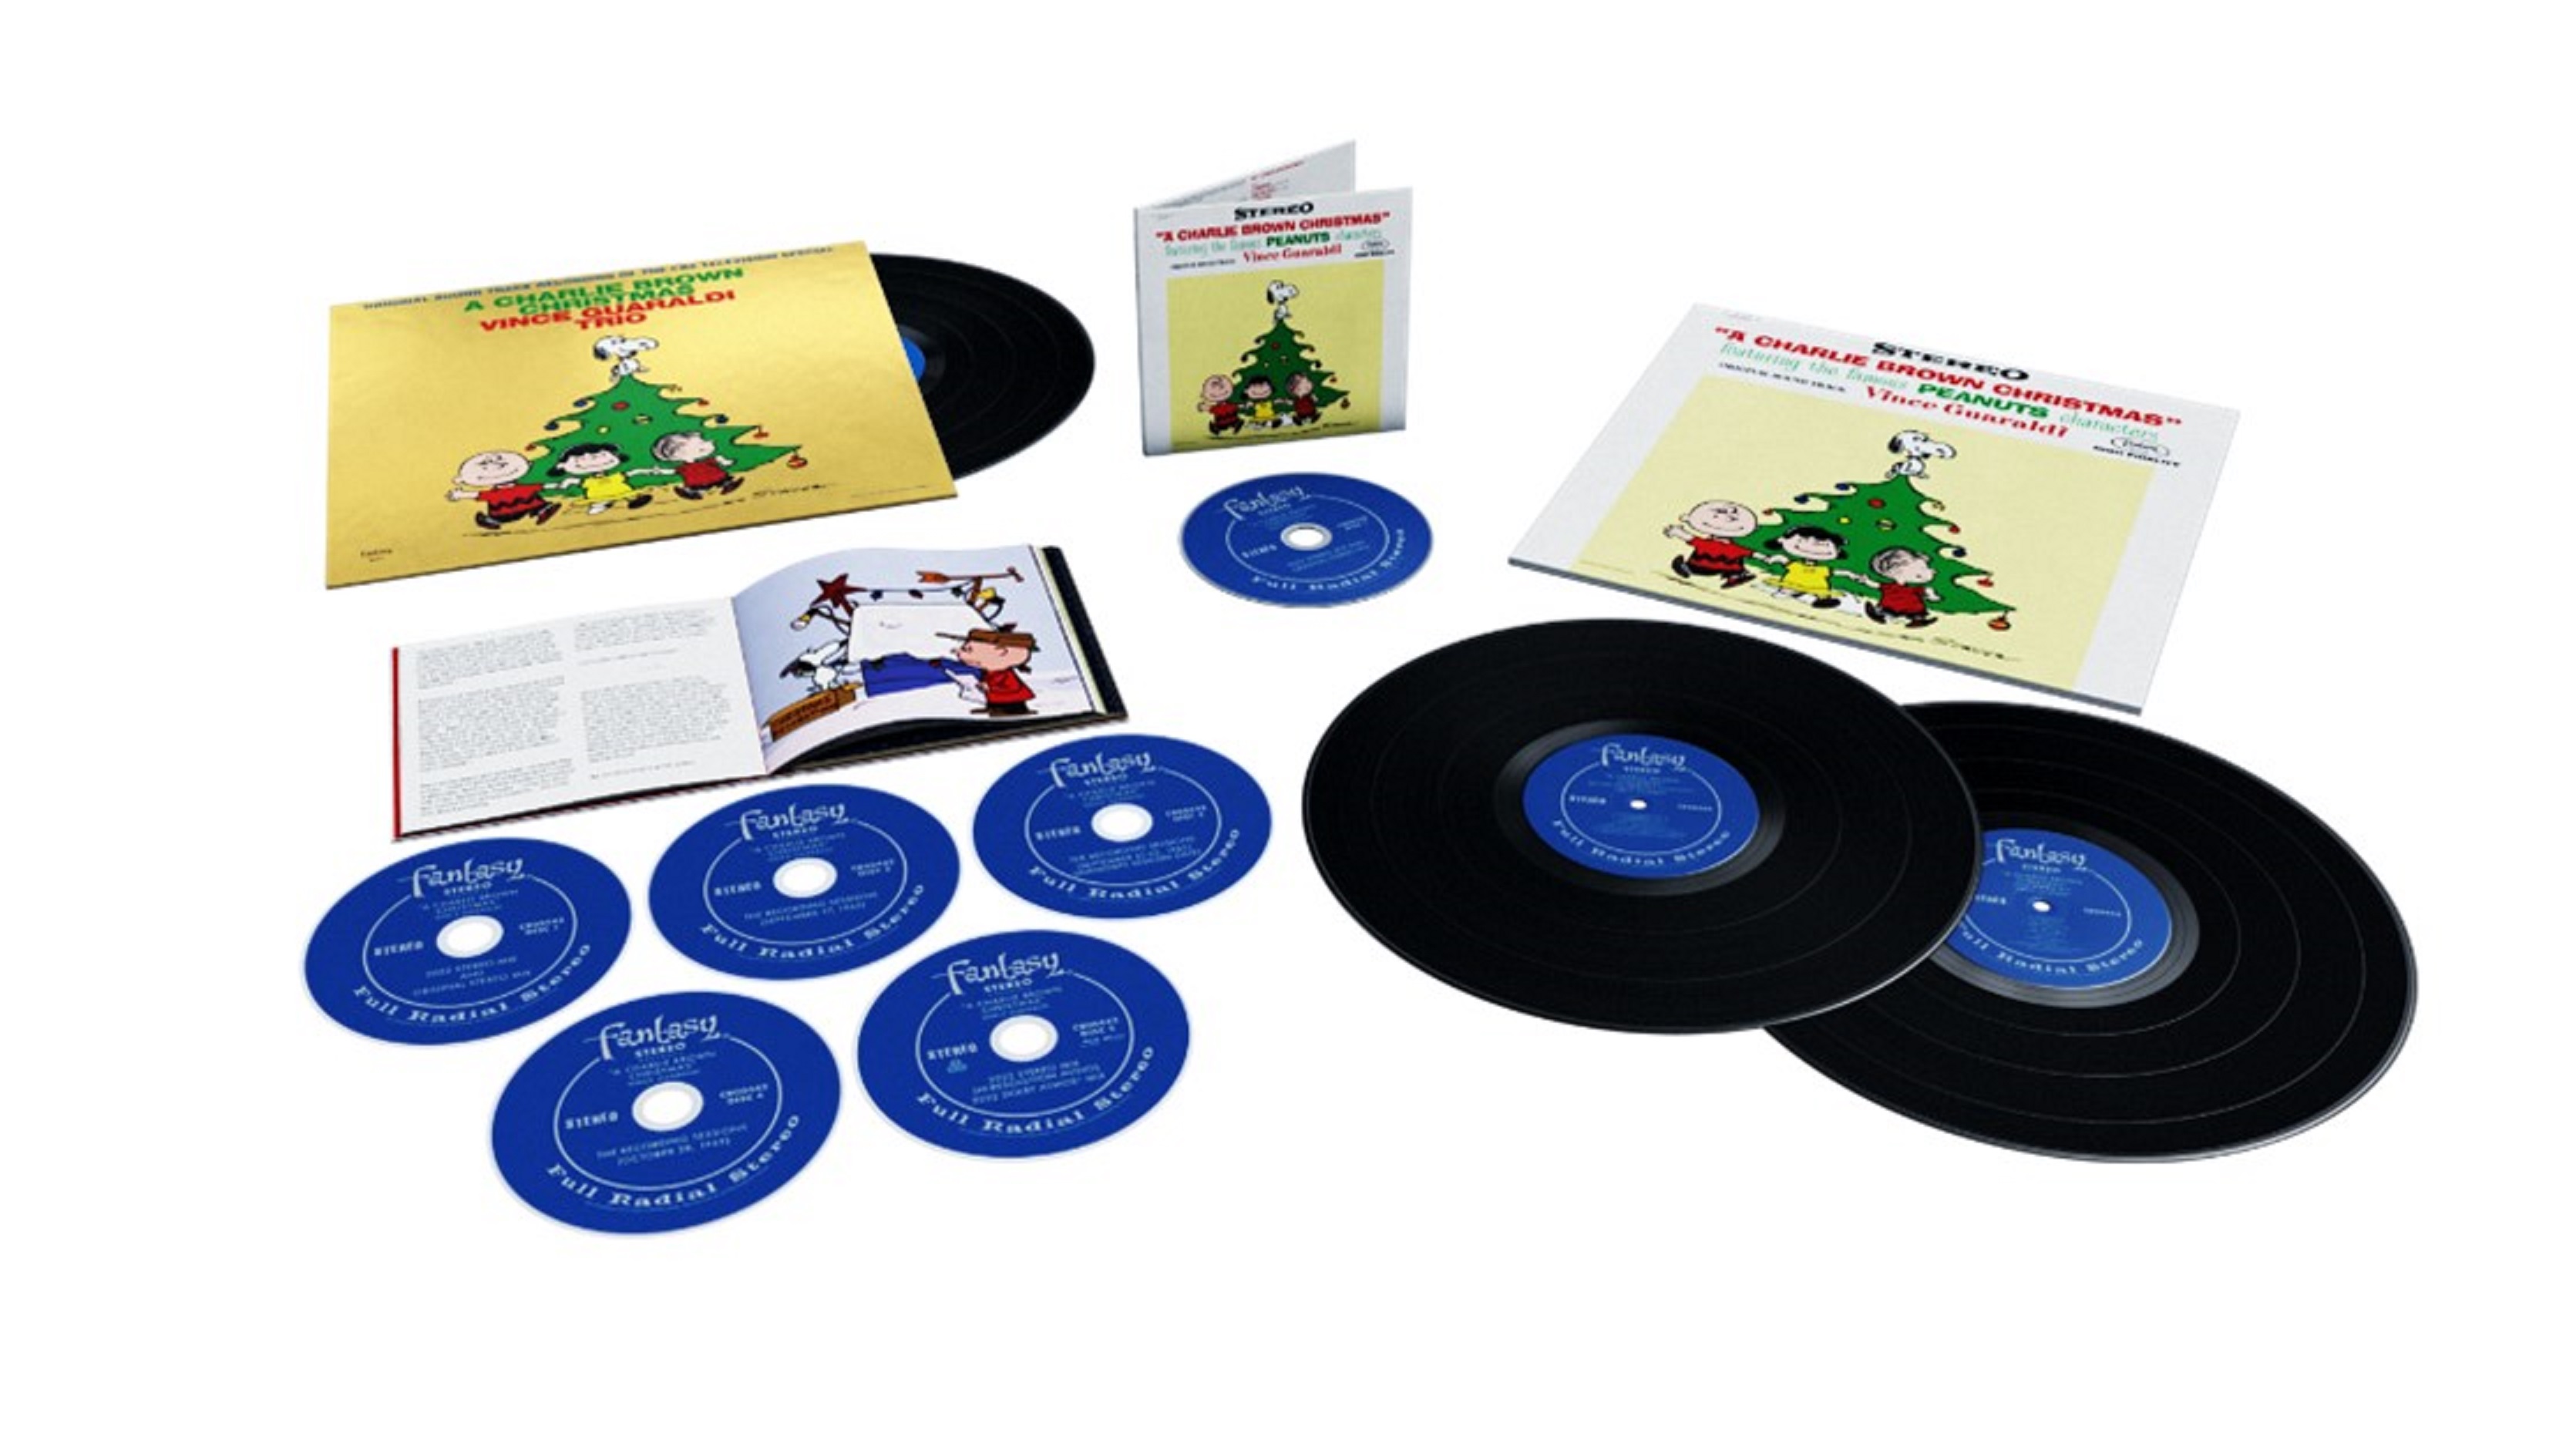 Definitive, bonus-filled edition of ‘A Charlie Brown Christmas’ out Oct. 14th on Craft Recordings